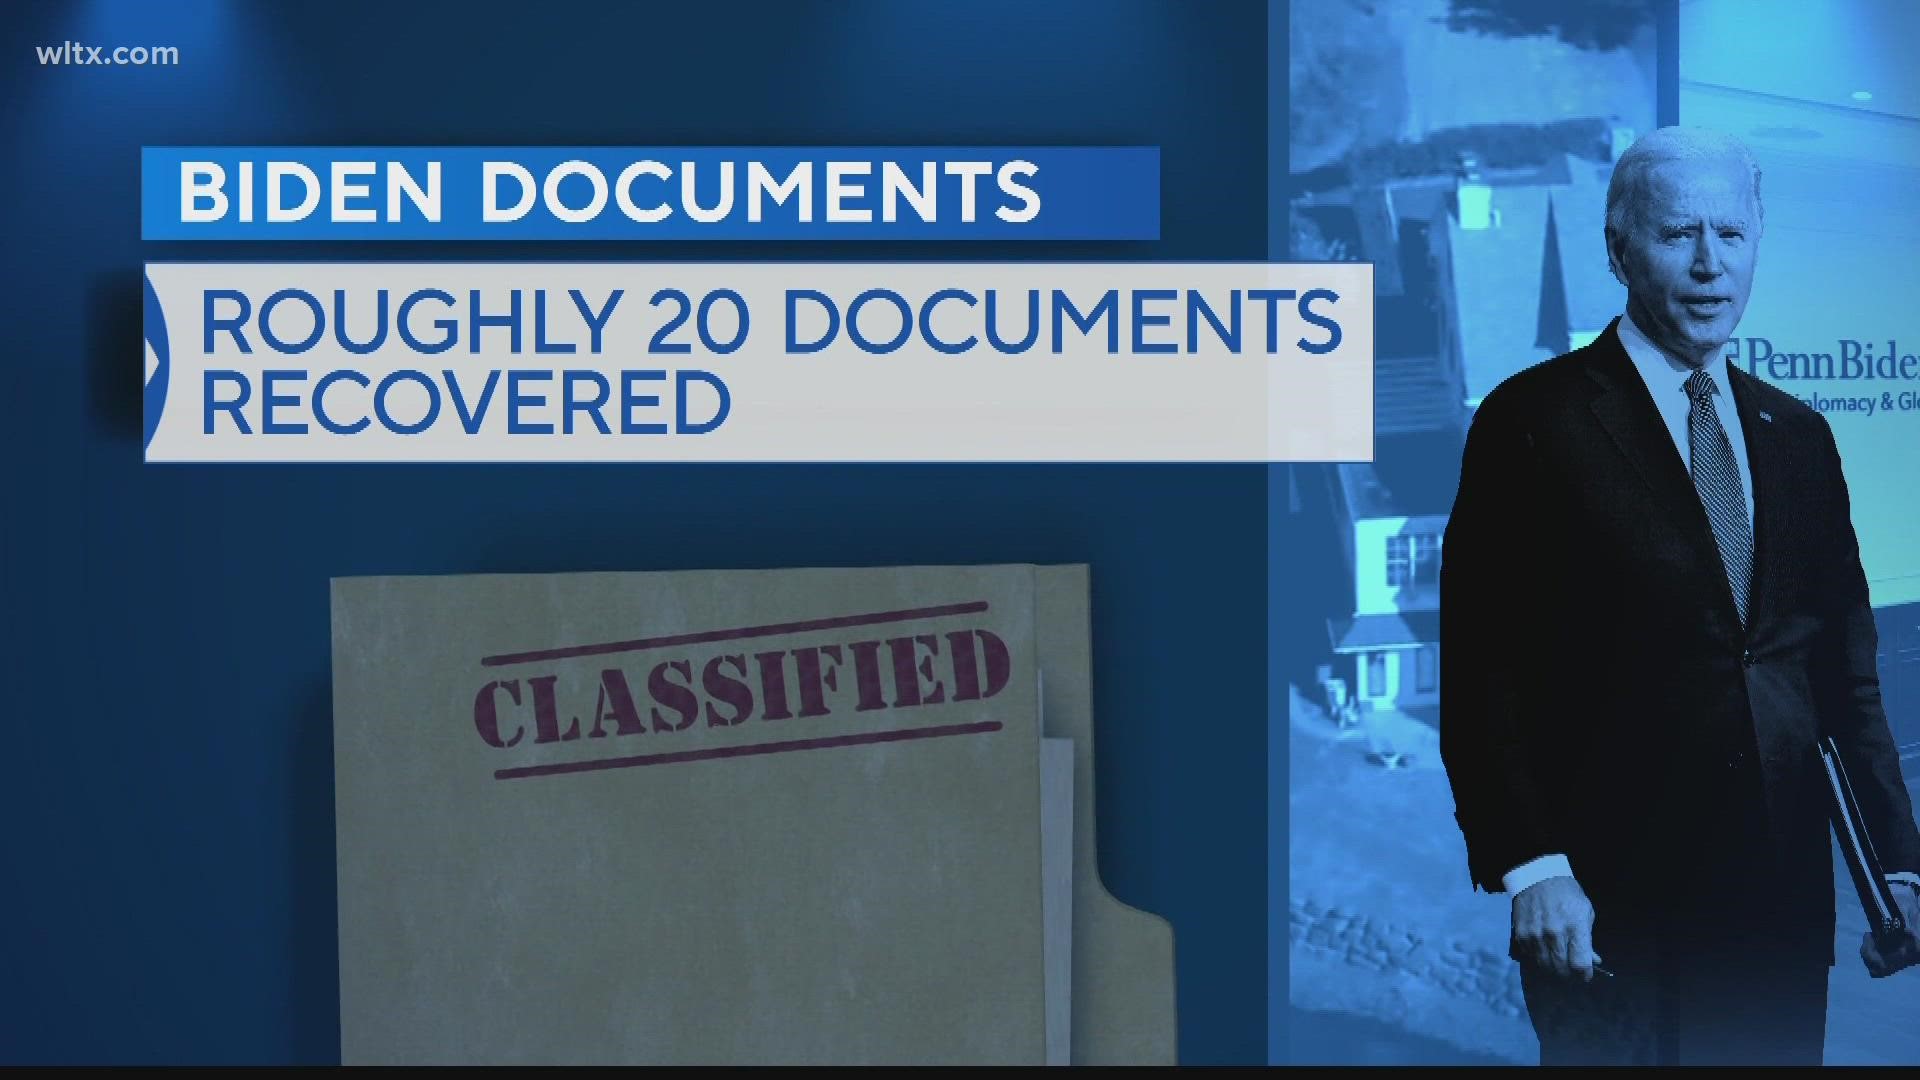 The discovery of classified documents at Joe Biden's home and offices is leading to a call for Congressional hearings.